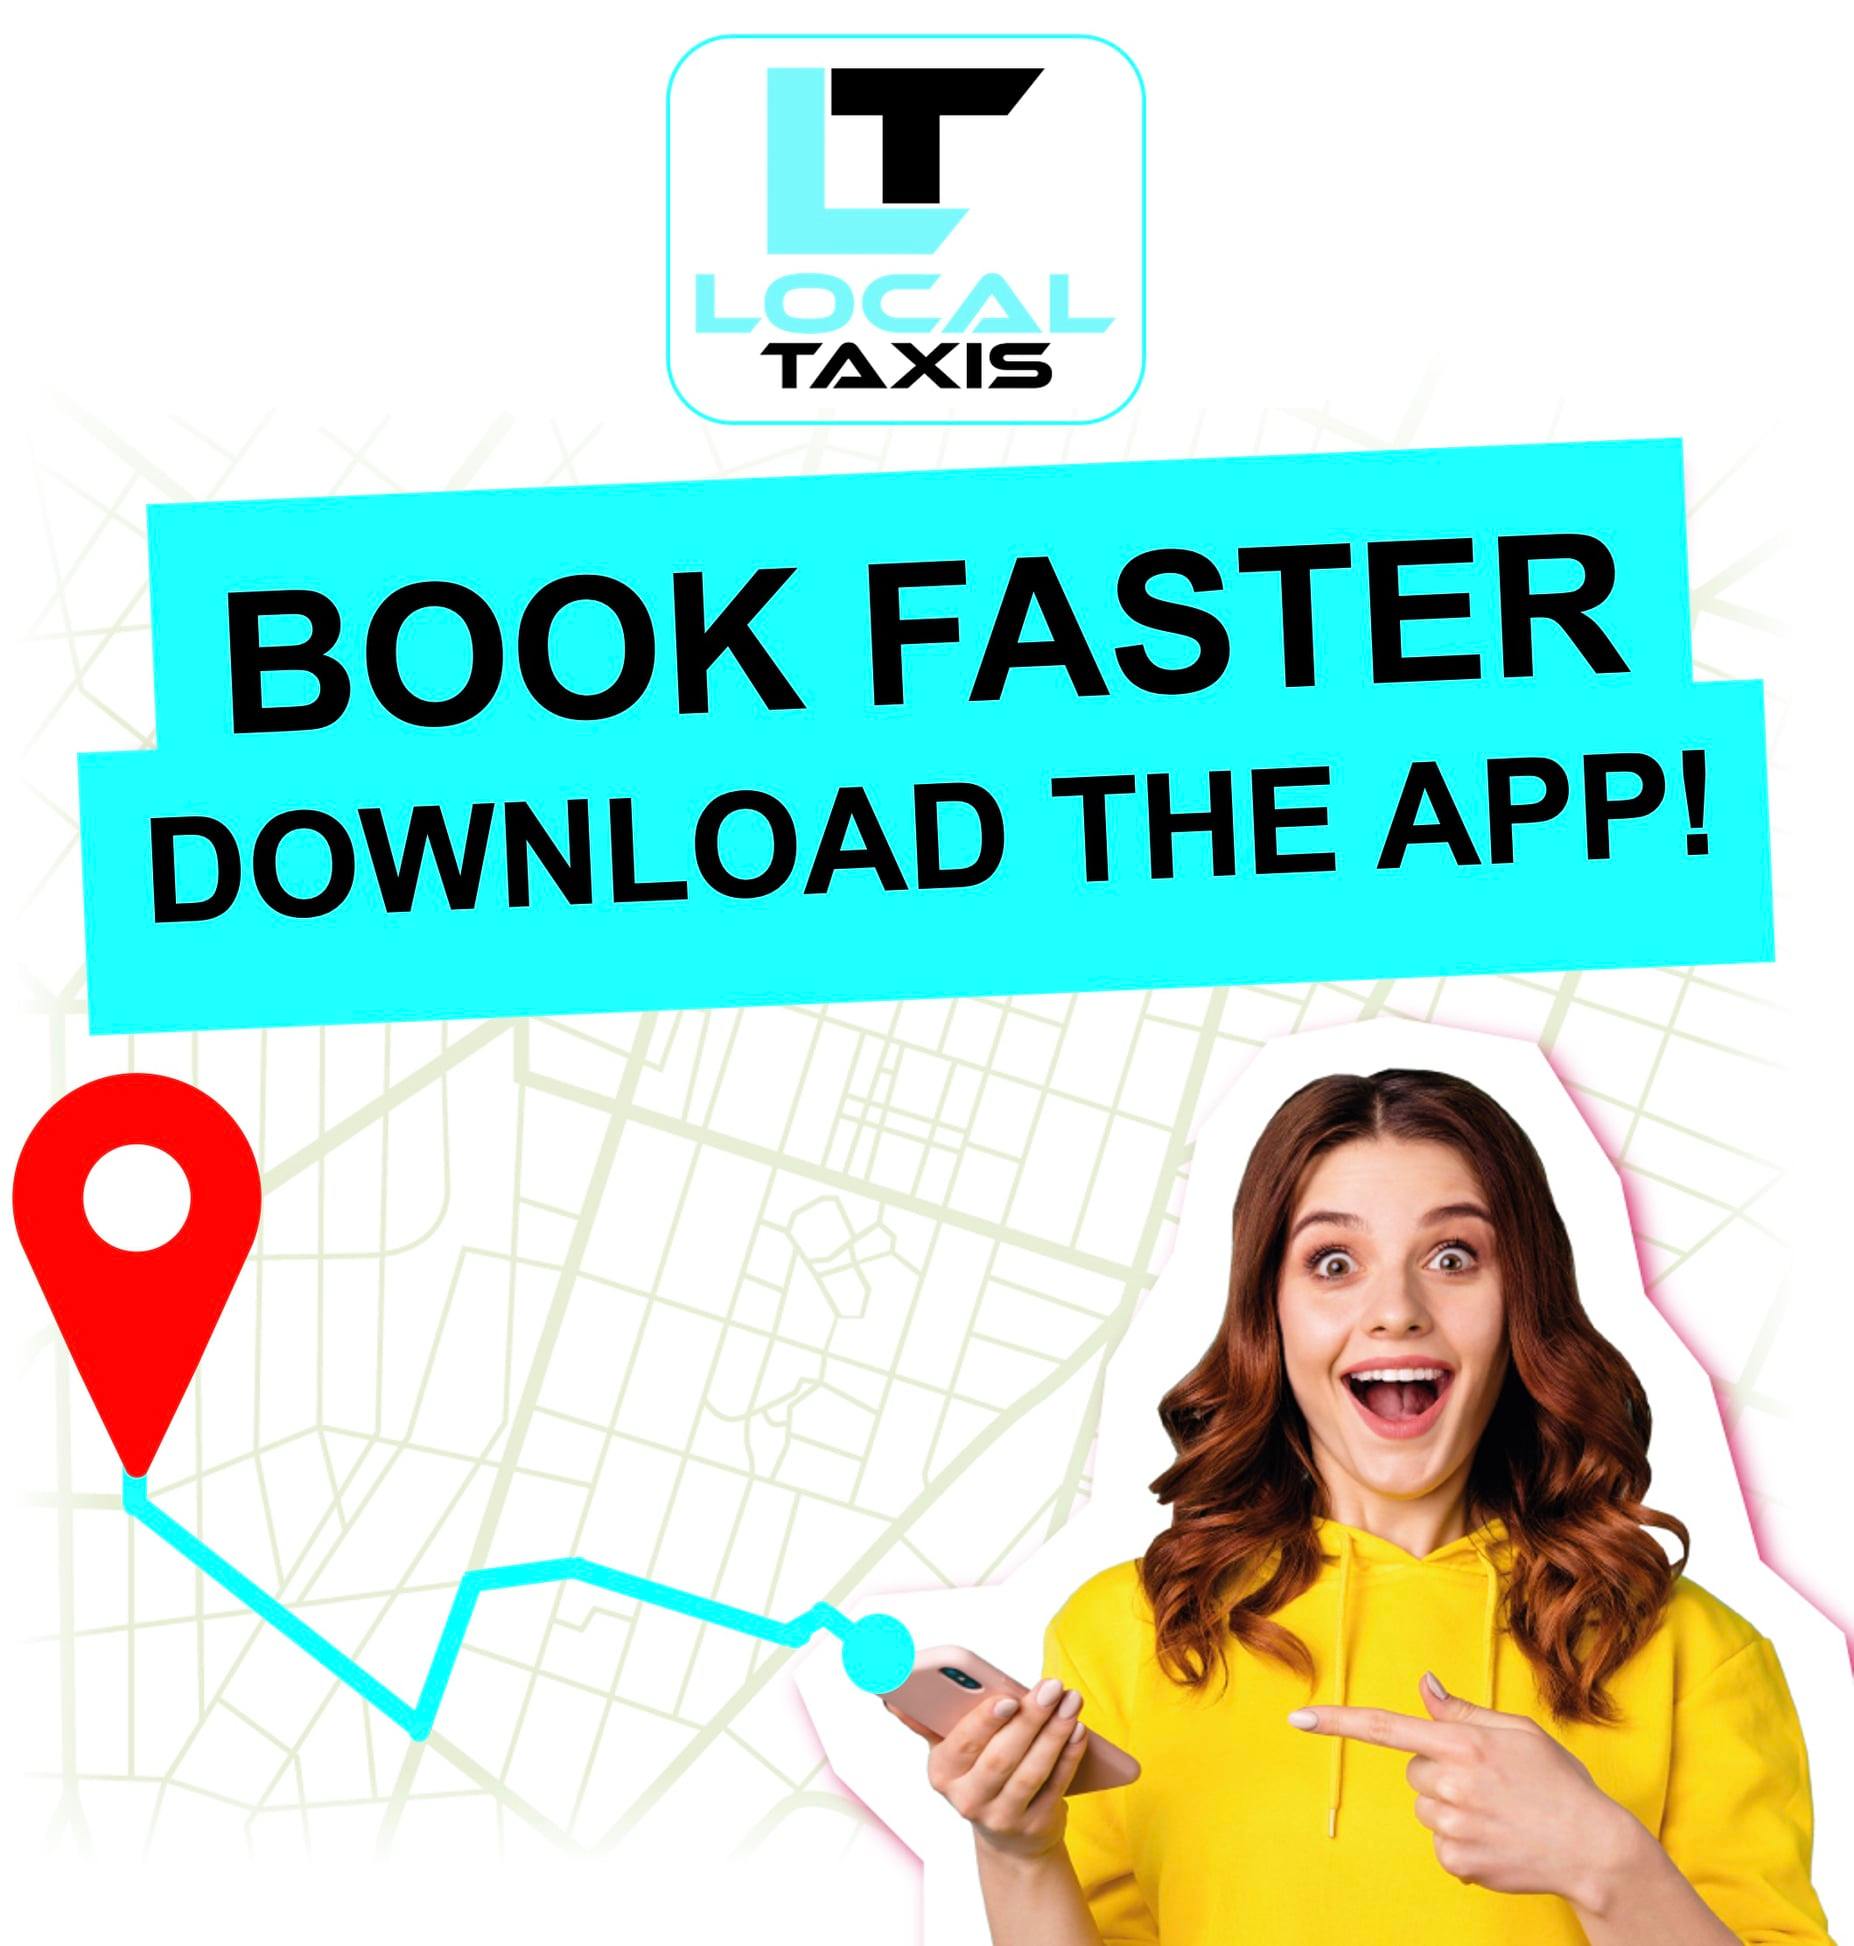 Book A Taxi - Book faster download the app - Local Taxis Blaydon Gateshead